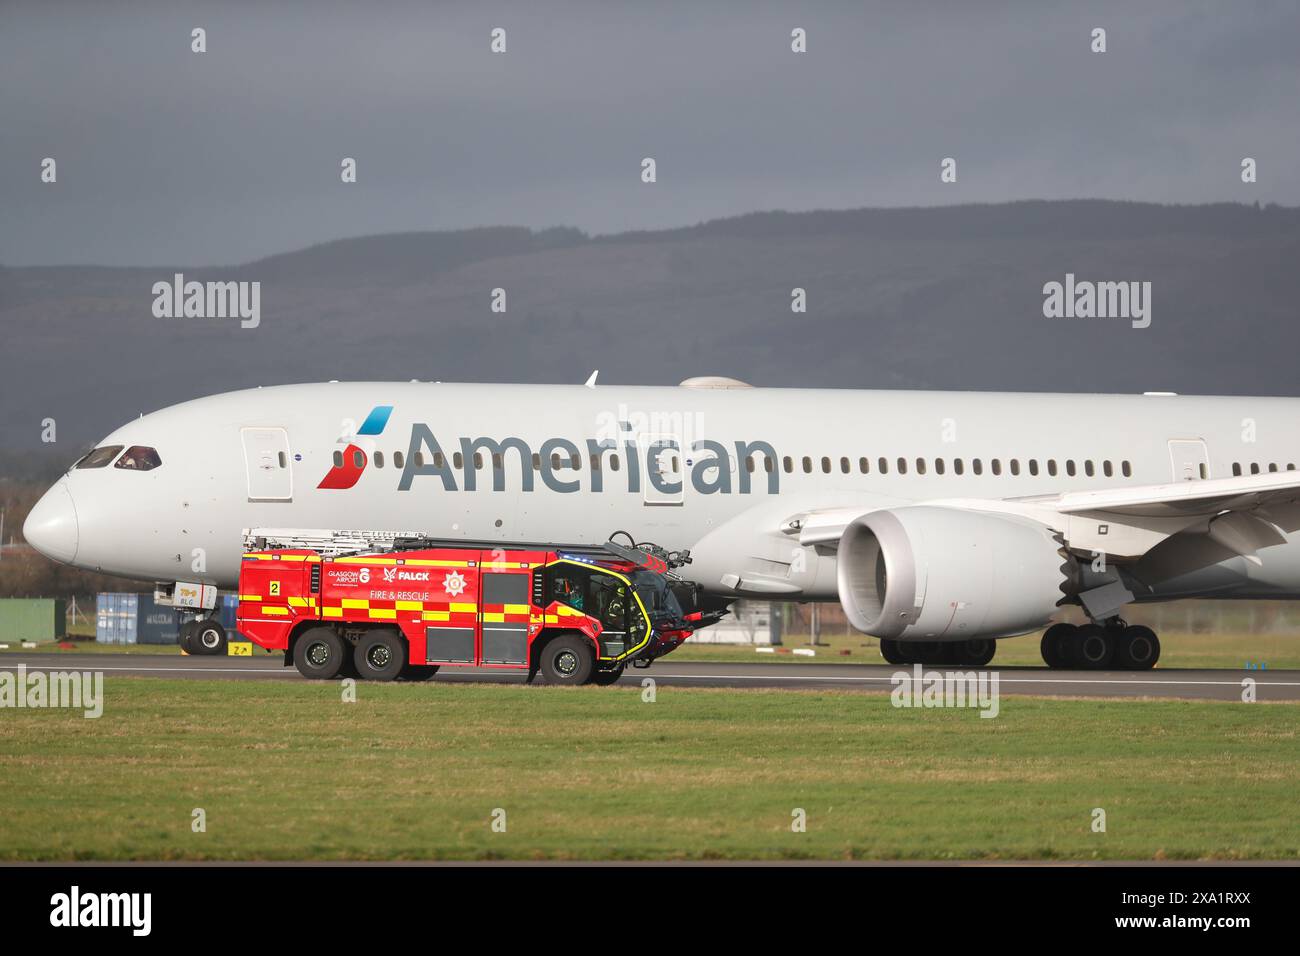 The American Airlines airplane on the runway next to an emergency vehicle in Glasgow, UK. Stock Photo